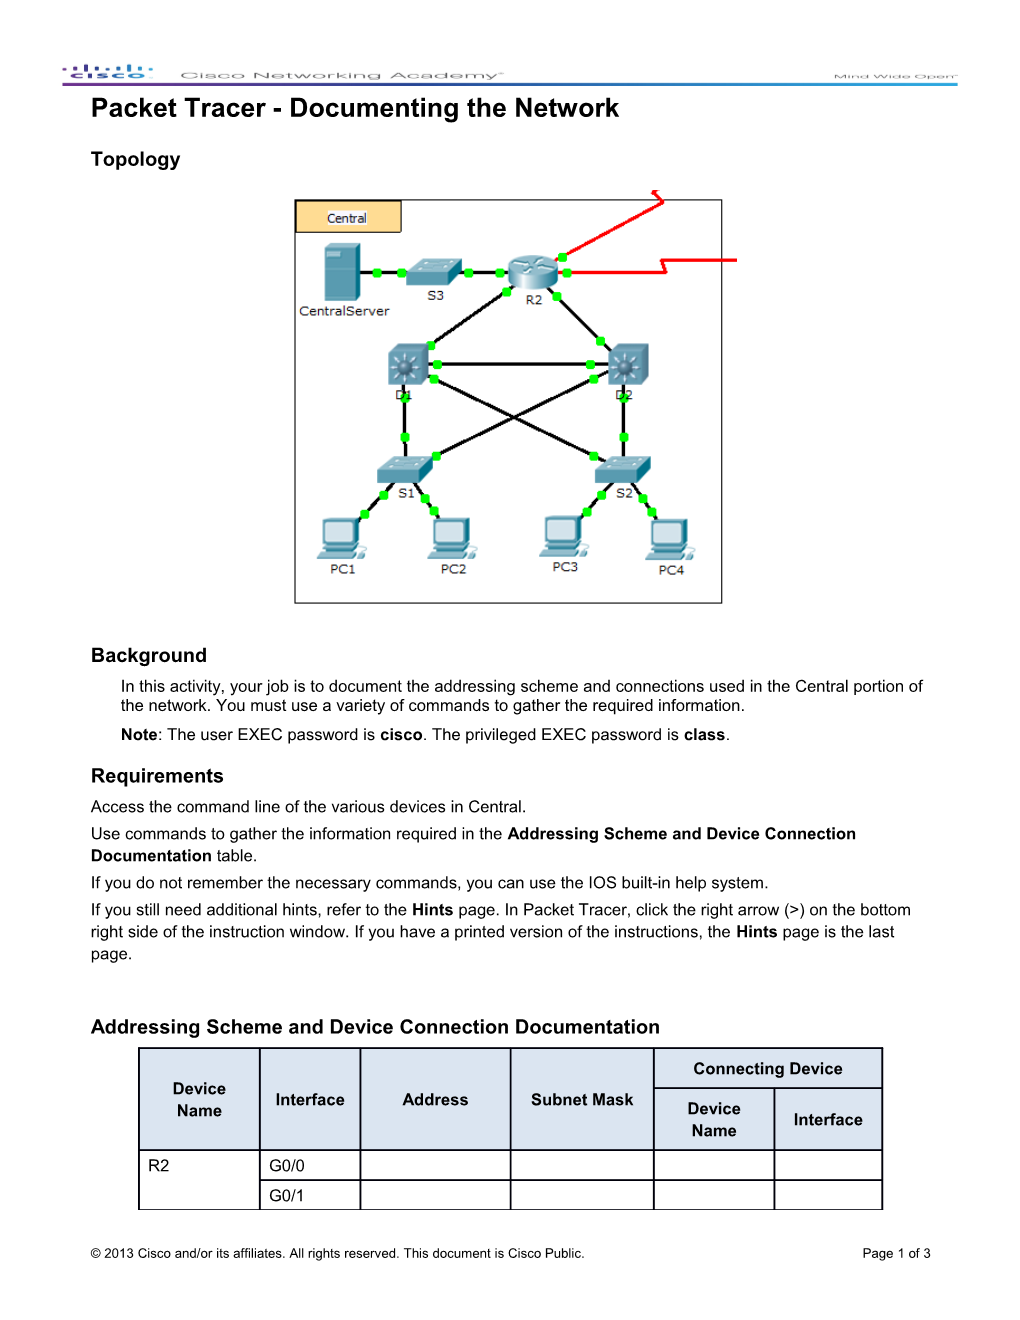 Packet Tracer- Document the Network